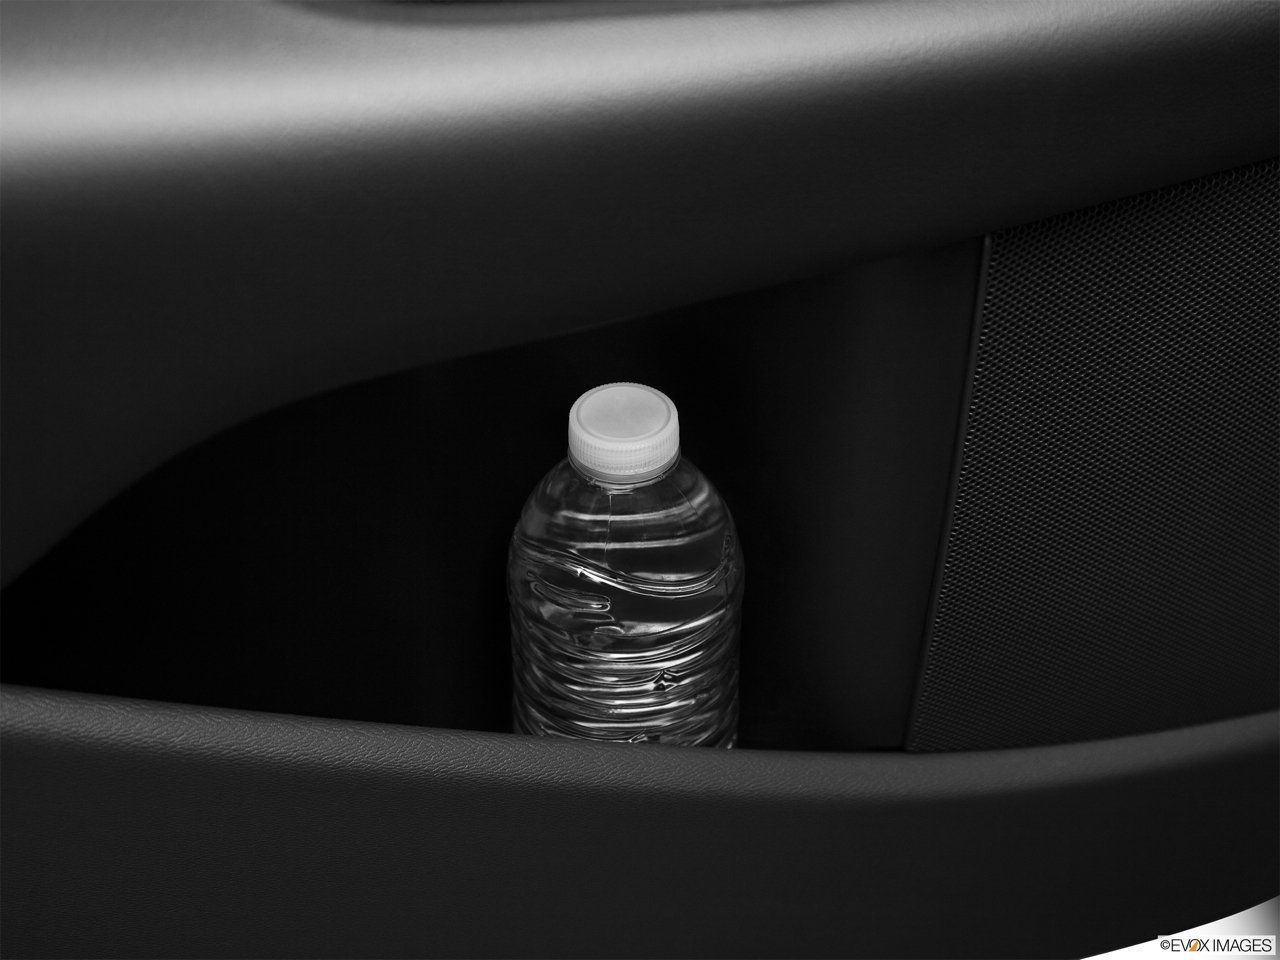 2011 Volvo XC70 3.2 Second row side cup holder with coffee prop, or second row door cup holder with water bottle. 